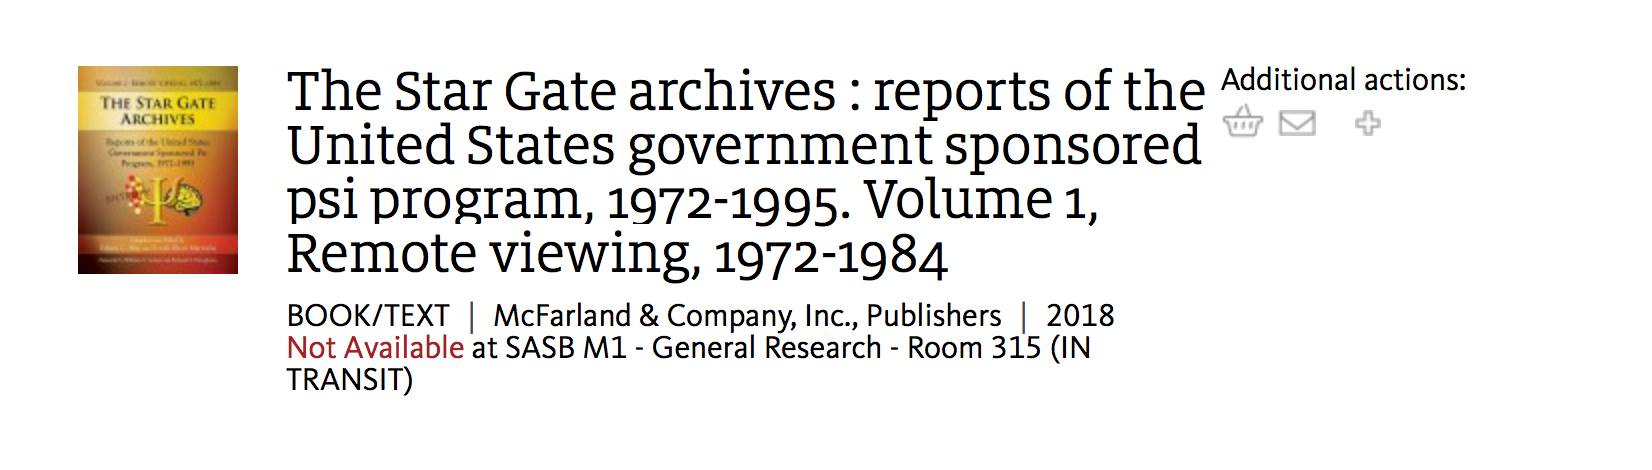 Quick Reminder: The US Government sponsored over two decades of psychic warfare research.  Ford, Reagan, Bush, Clinton